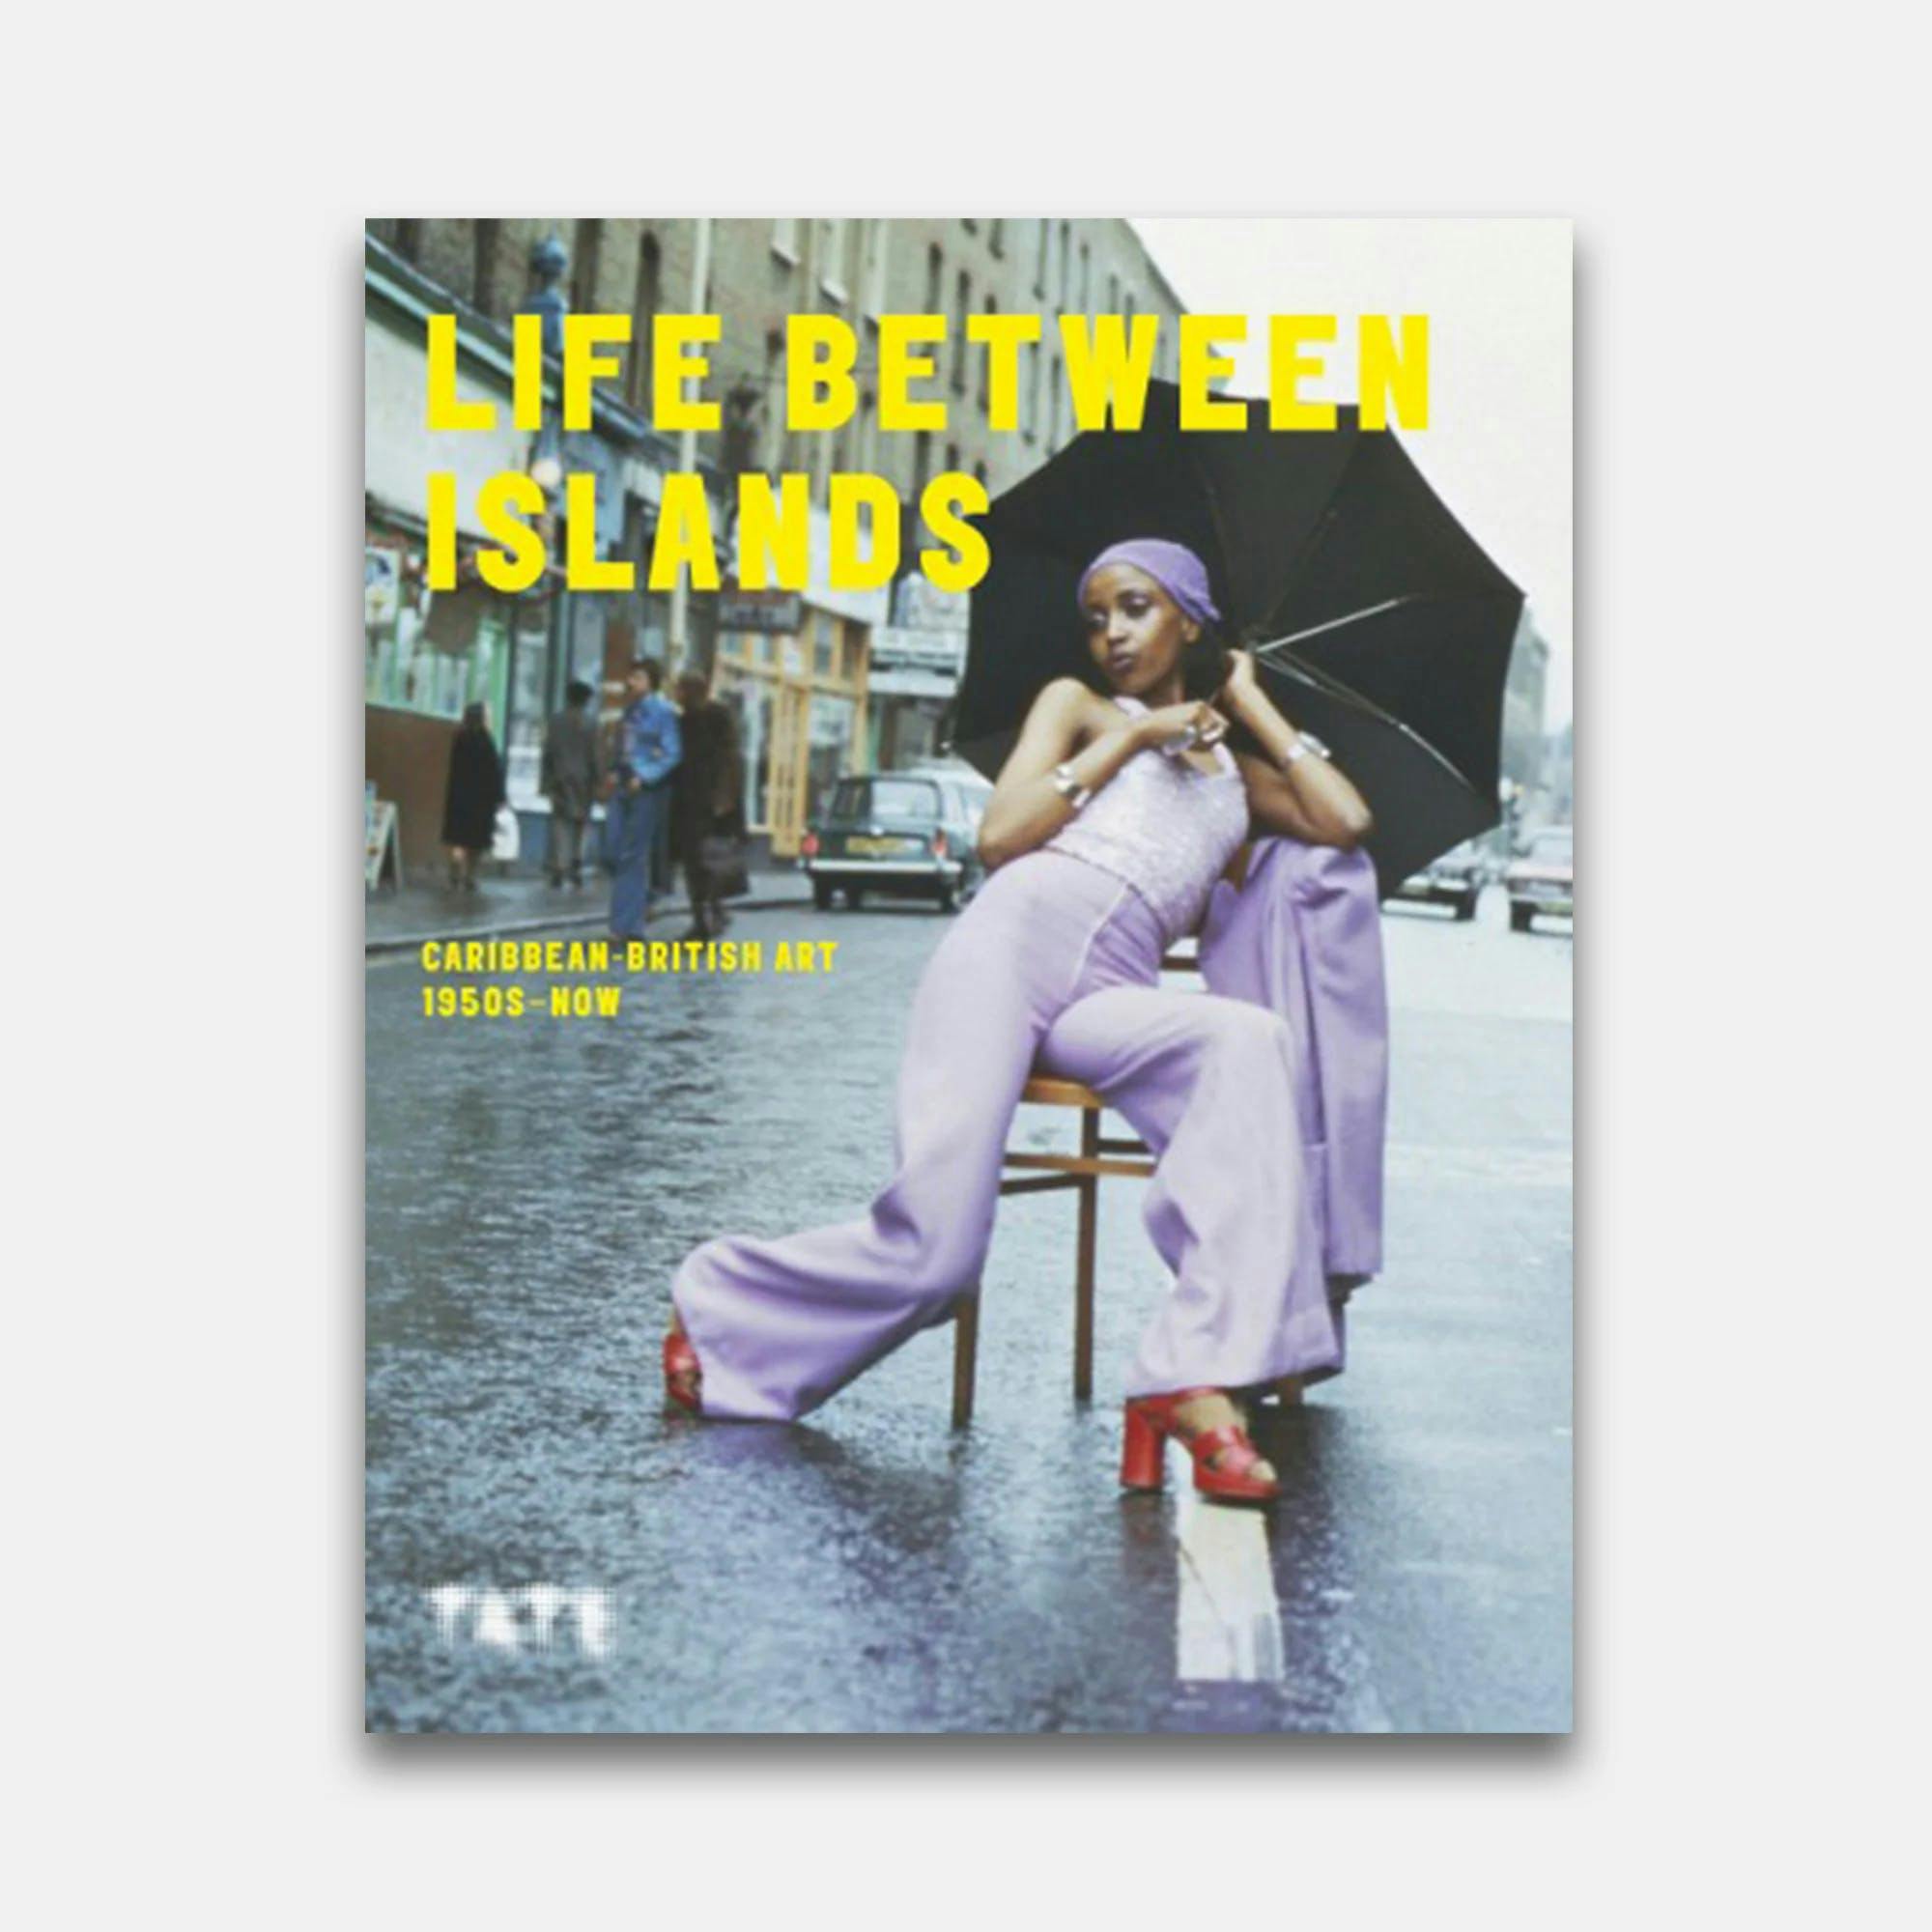 Cover of a book with a woman posing with an umbrella